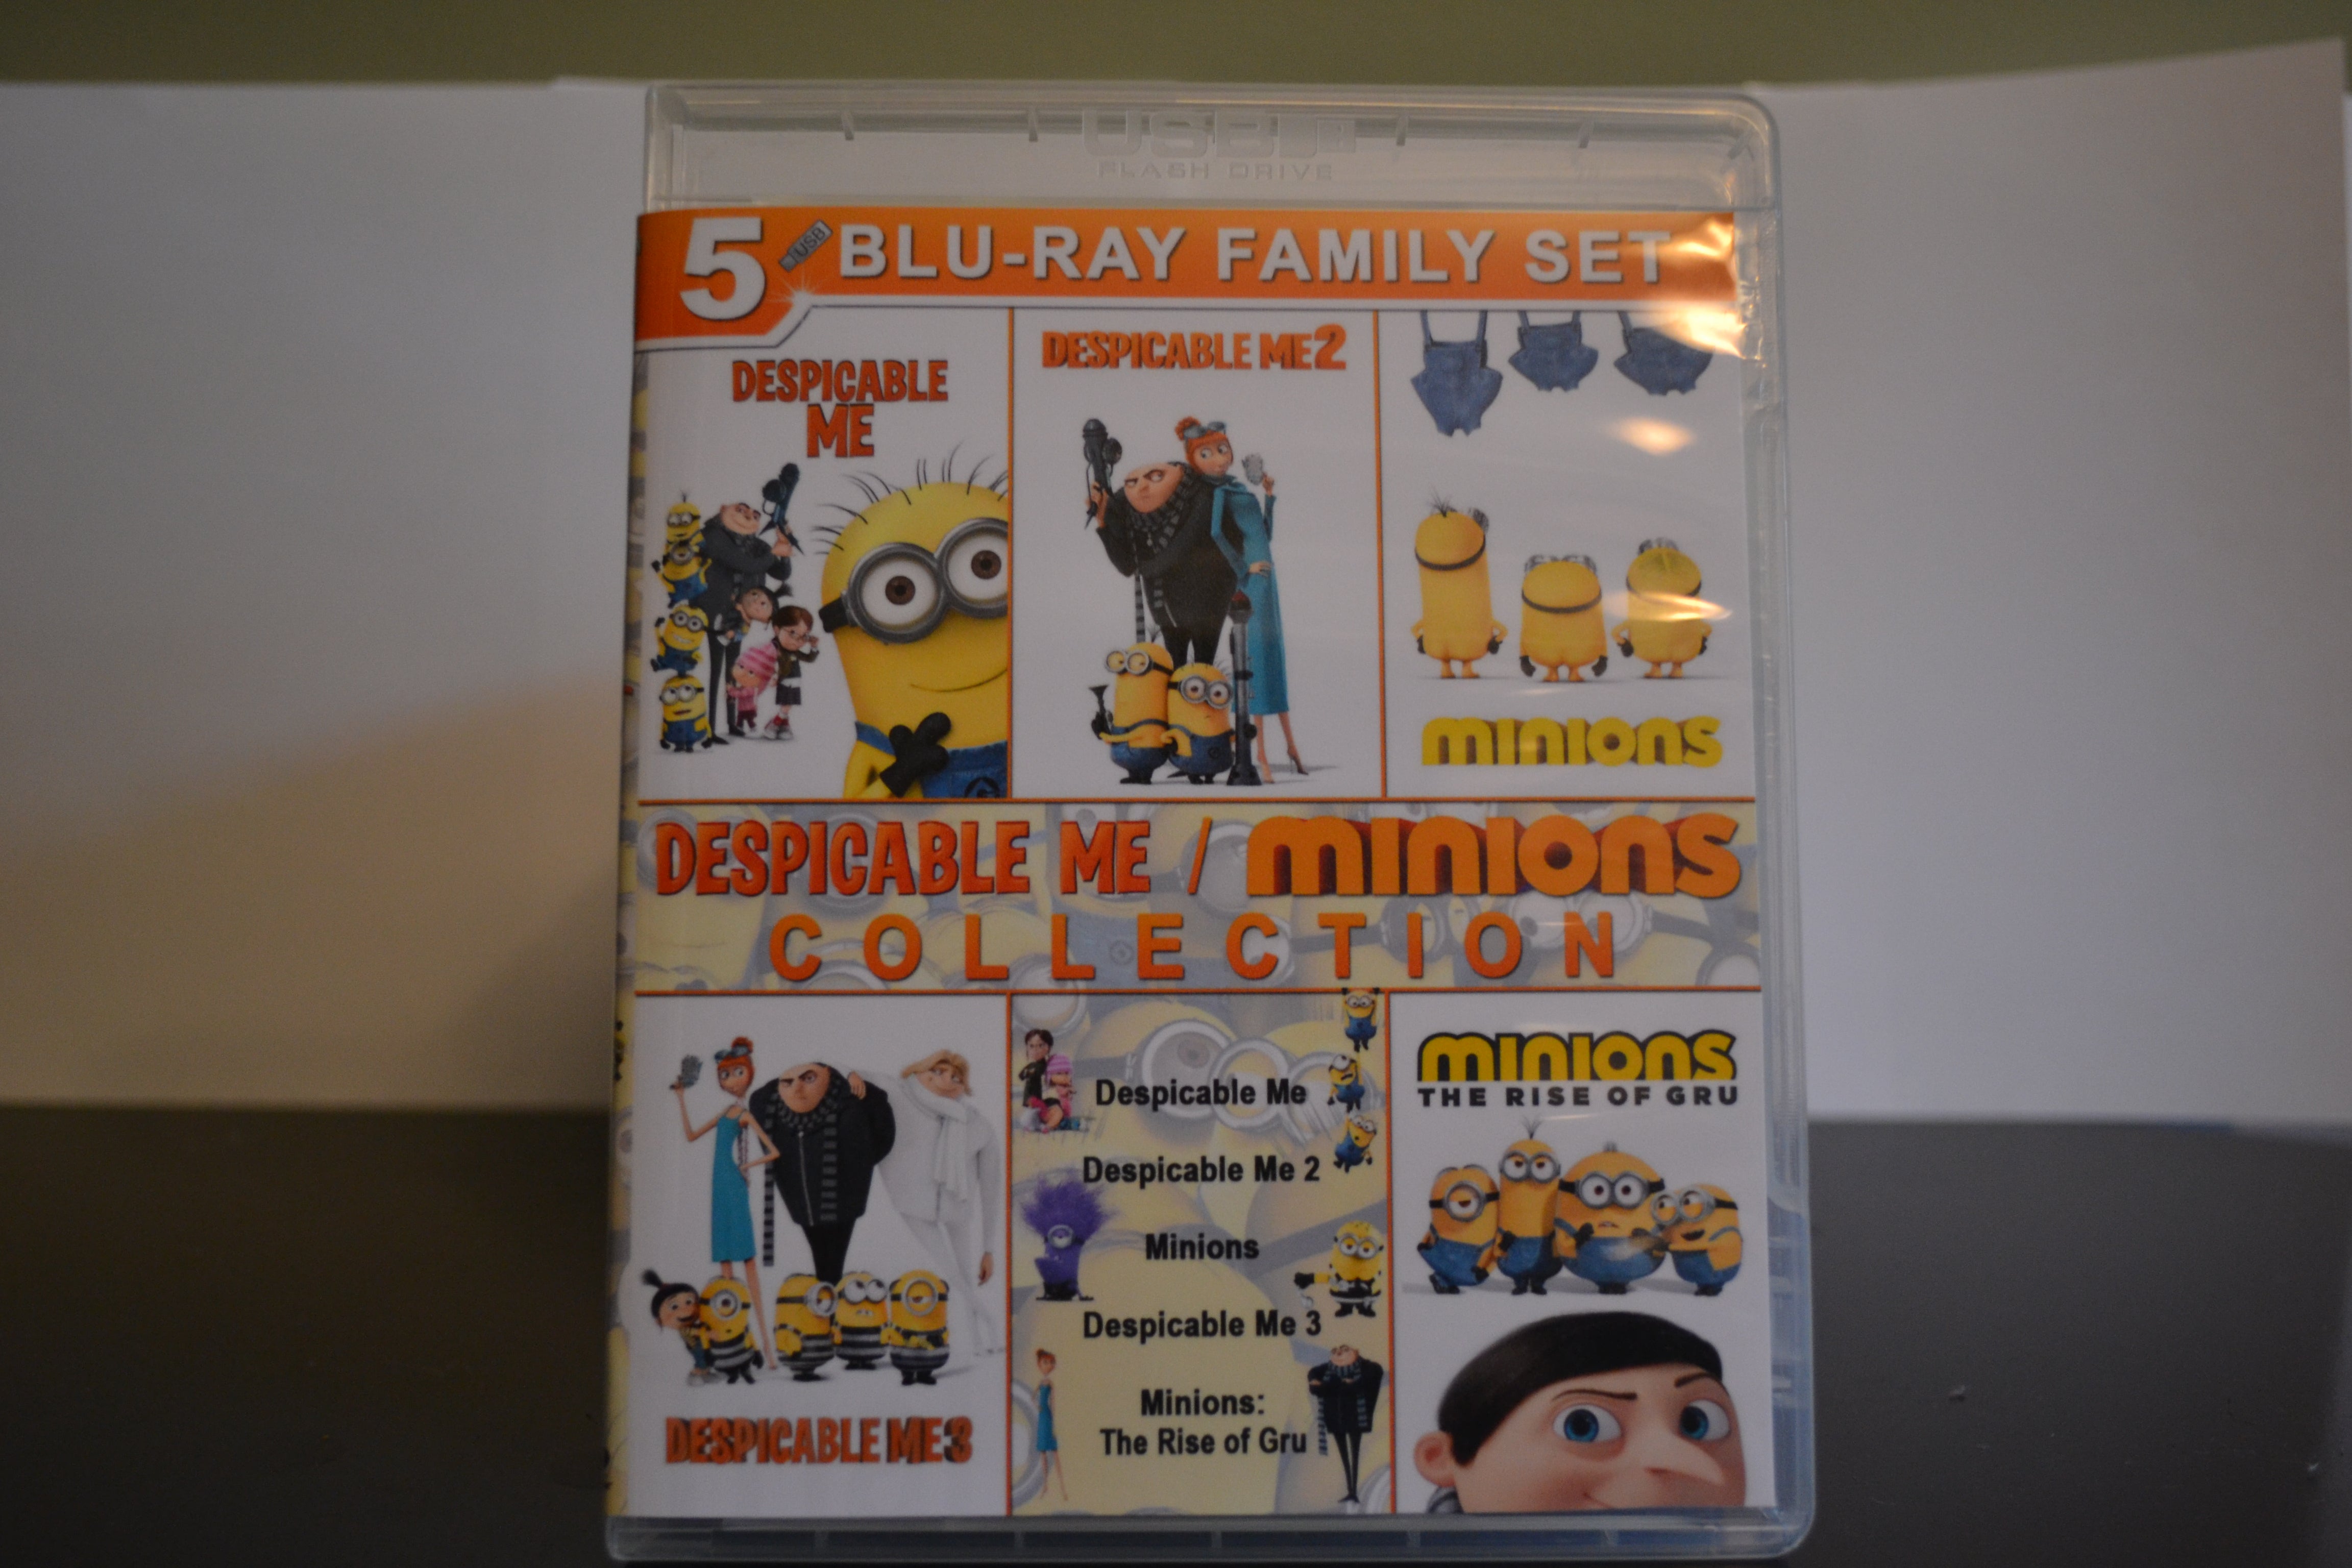 Flash Drive Despicable Me / Minions Collection